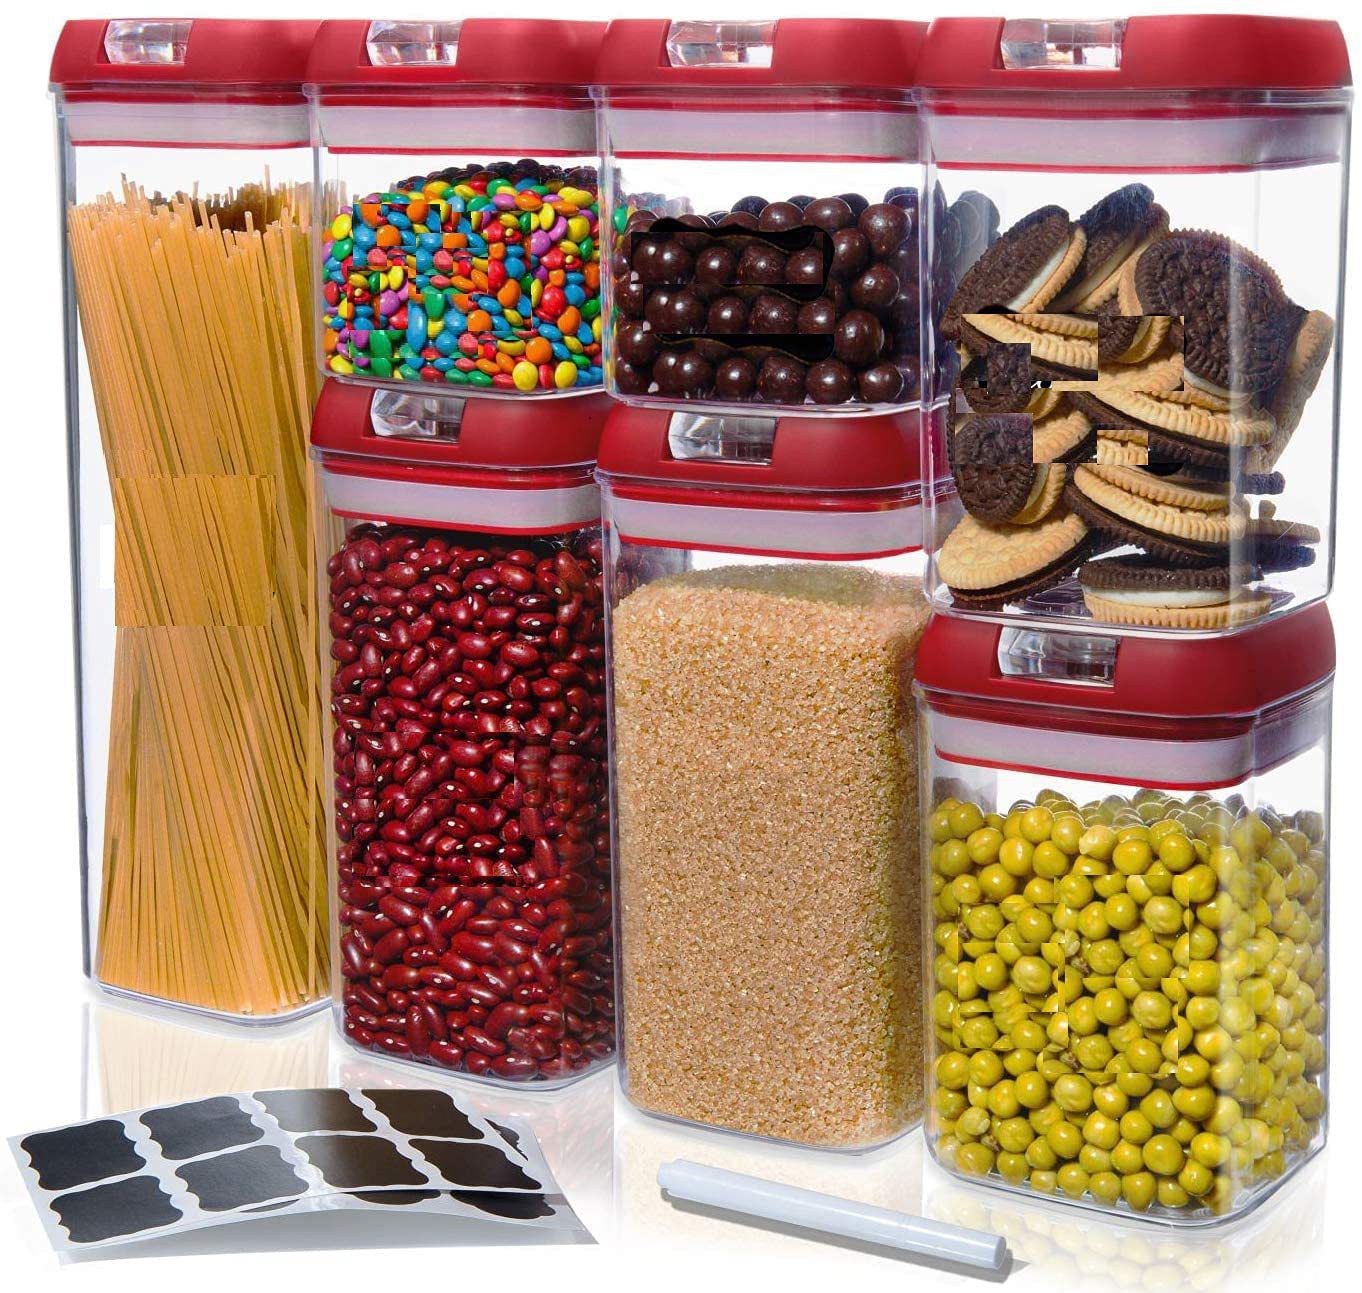 JoyJolt Airtight Glass Jars Storage Cannister with Silicone Seal Lids - Set of 3 - 50 oz.